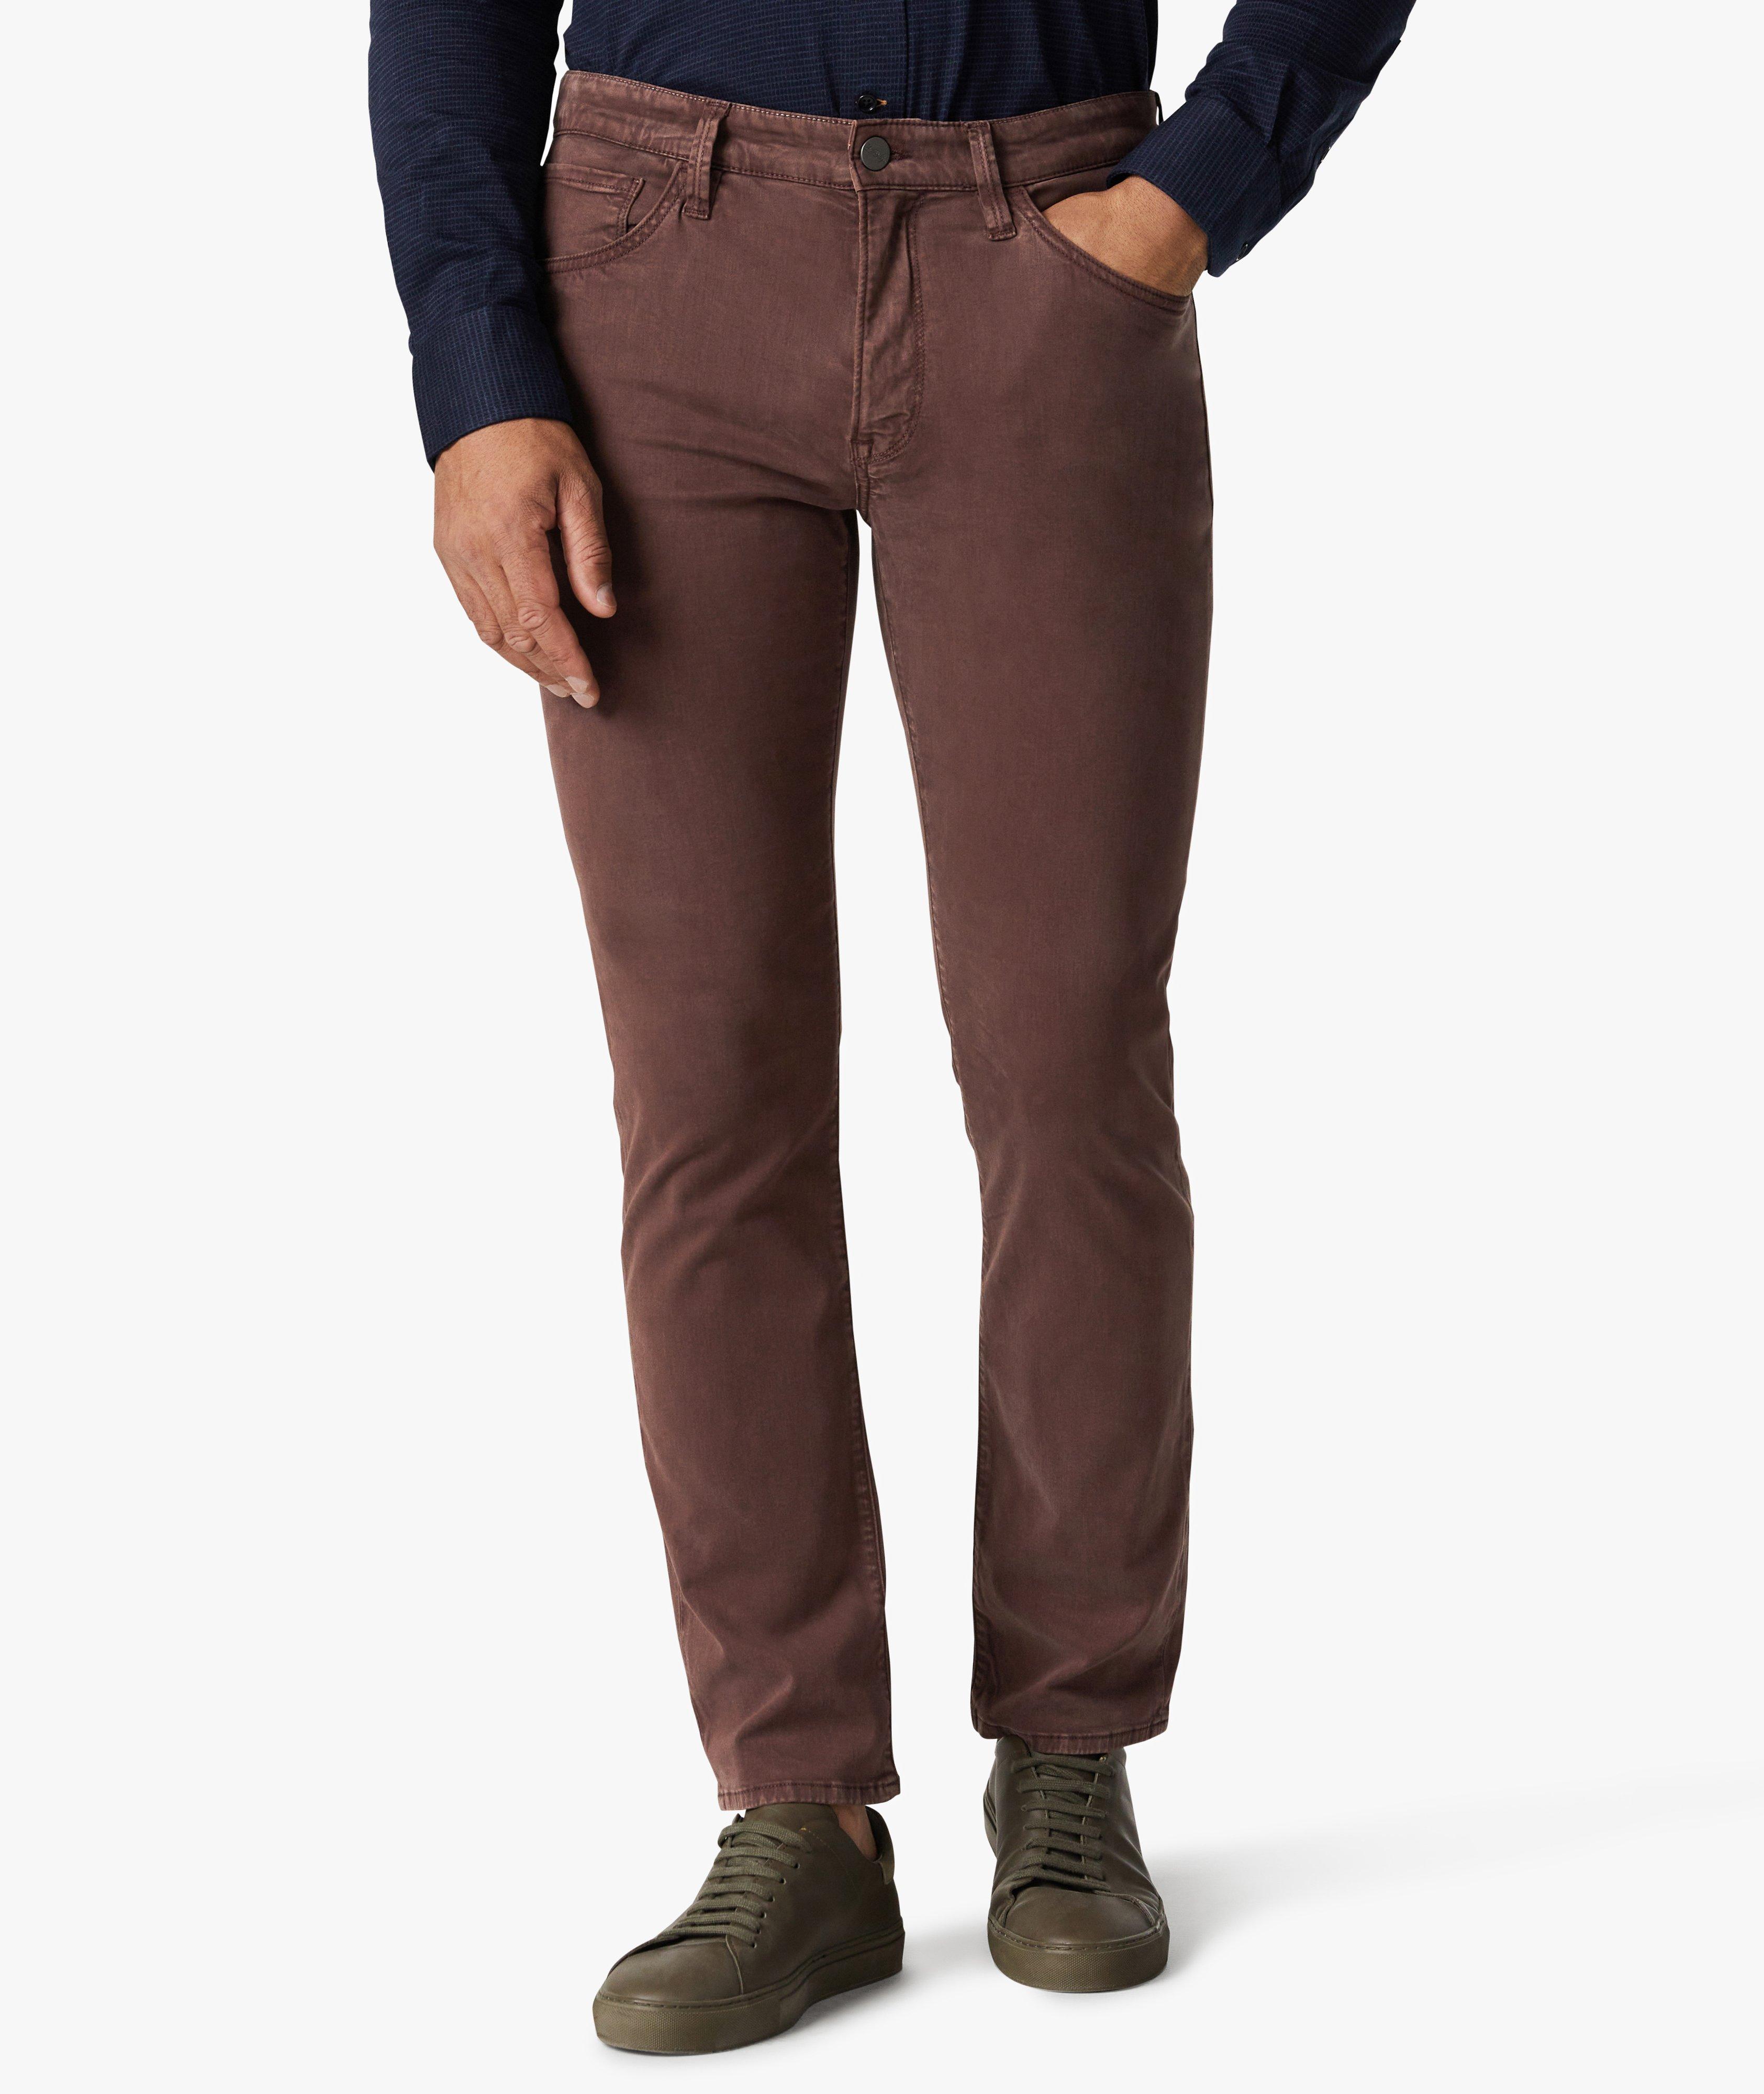 Courage Straight Leg Cotton Twill-Blend Pants image 0